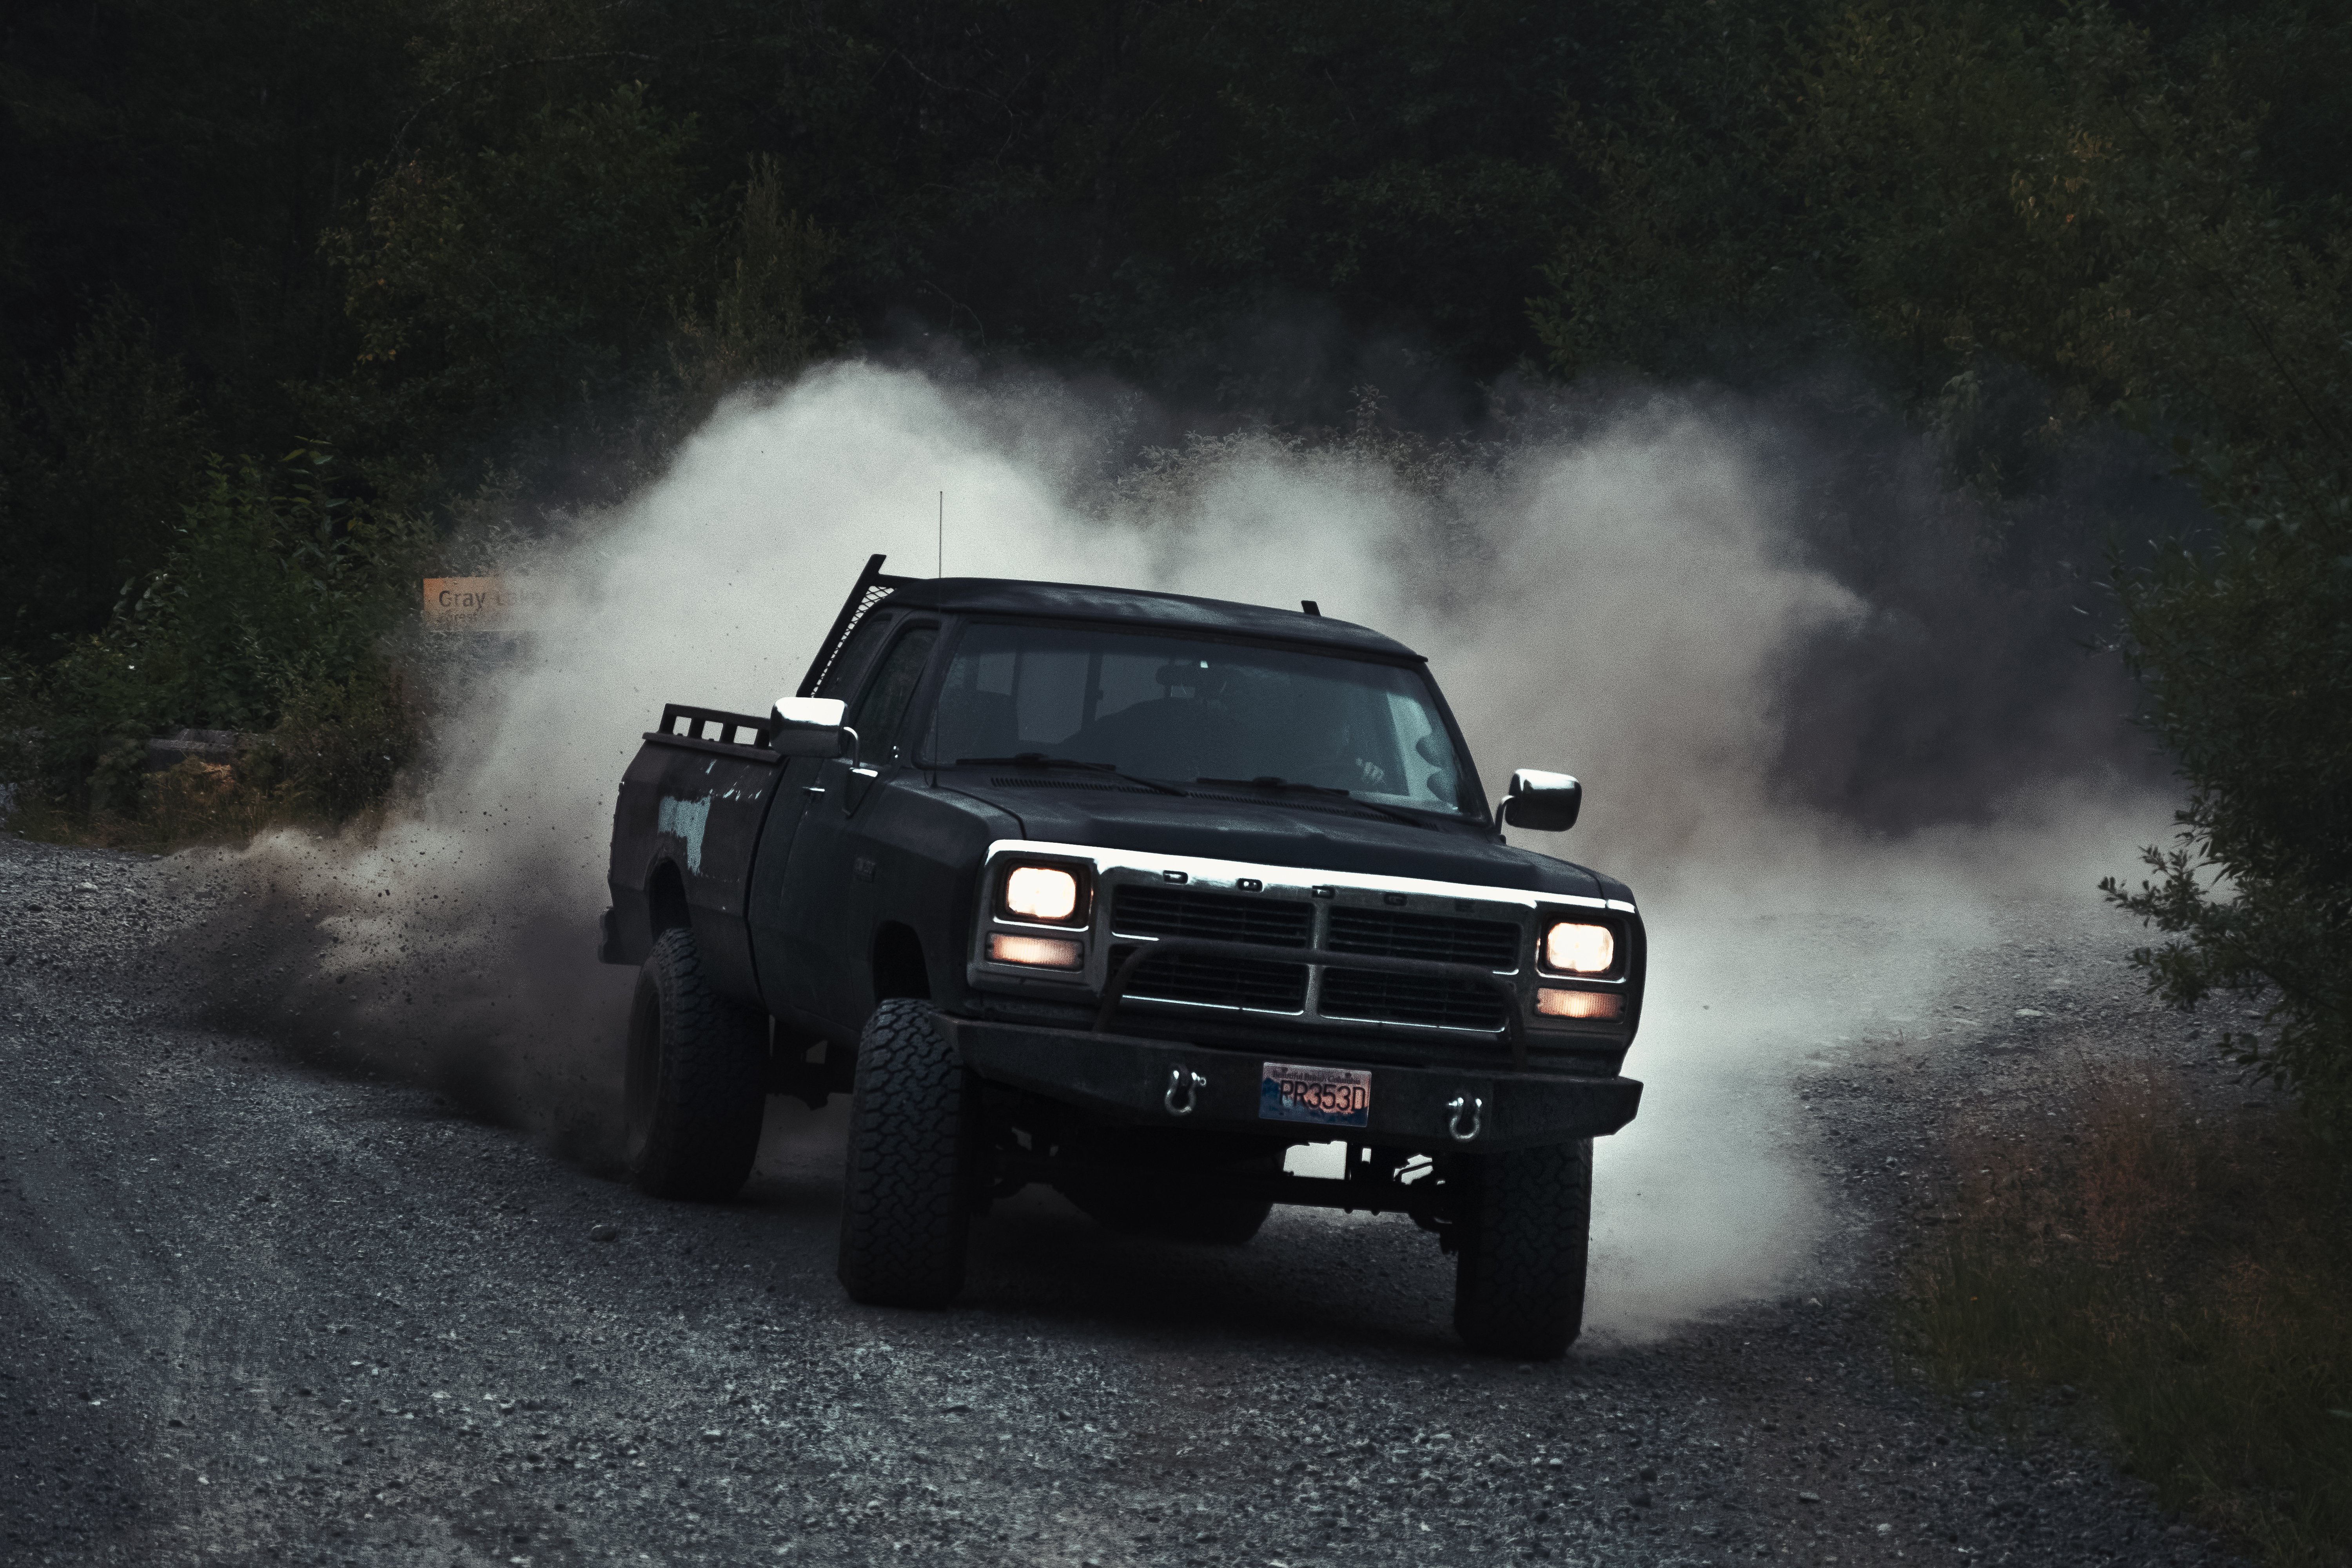 Black Pick Up Truck Driving on Off Road · Free